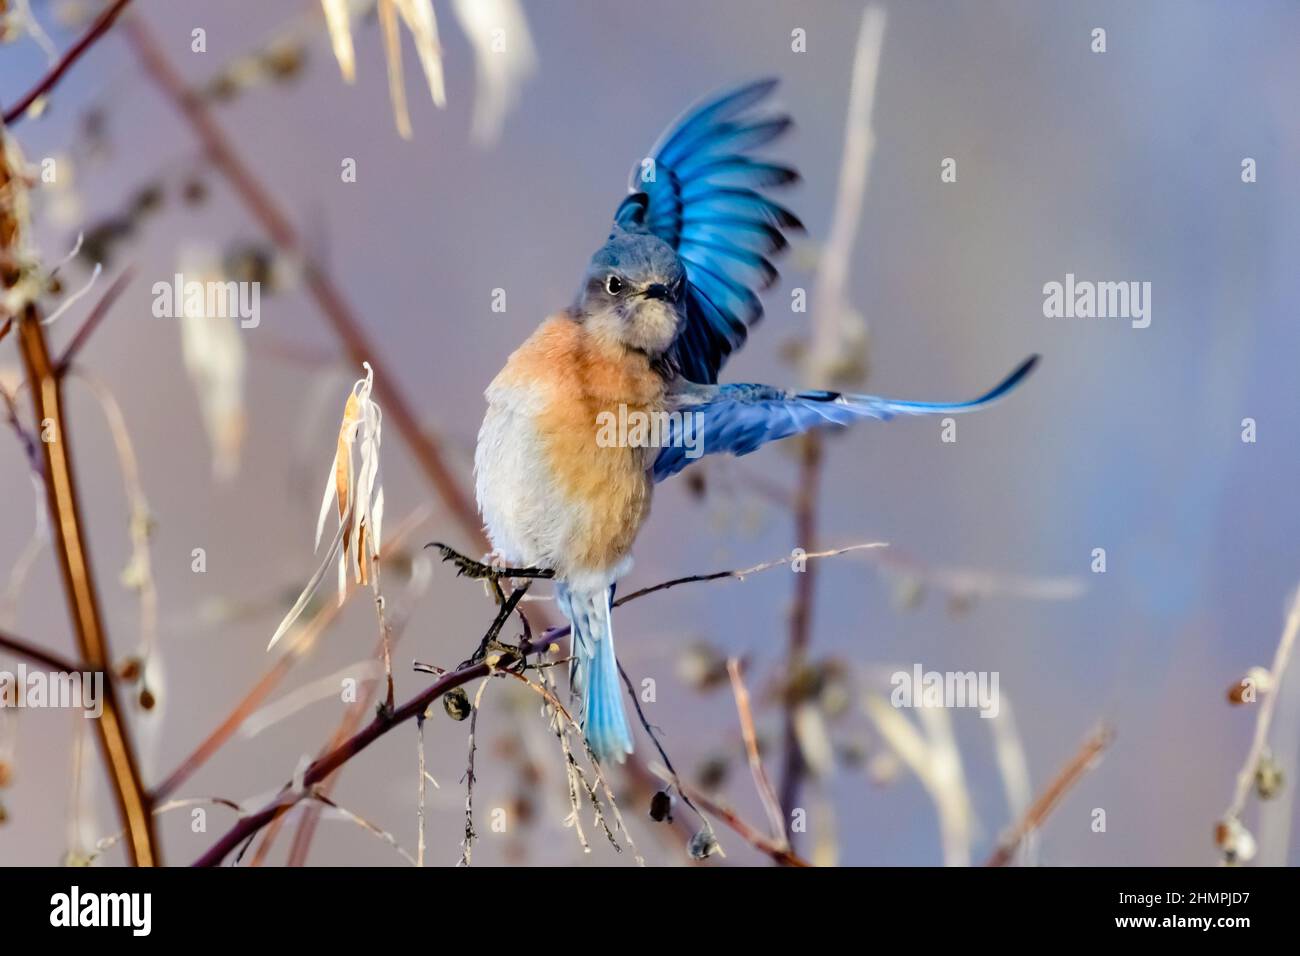 Western bluebird perched on a branch with spread wings, British Columbia, Canada Stock Photo